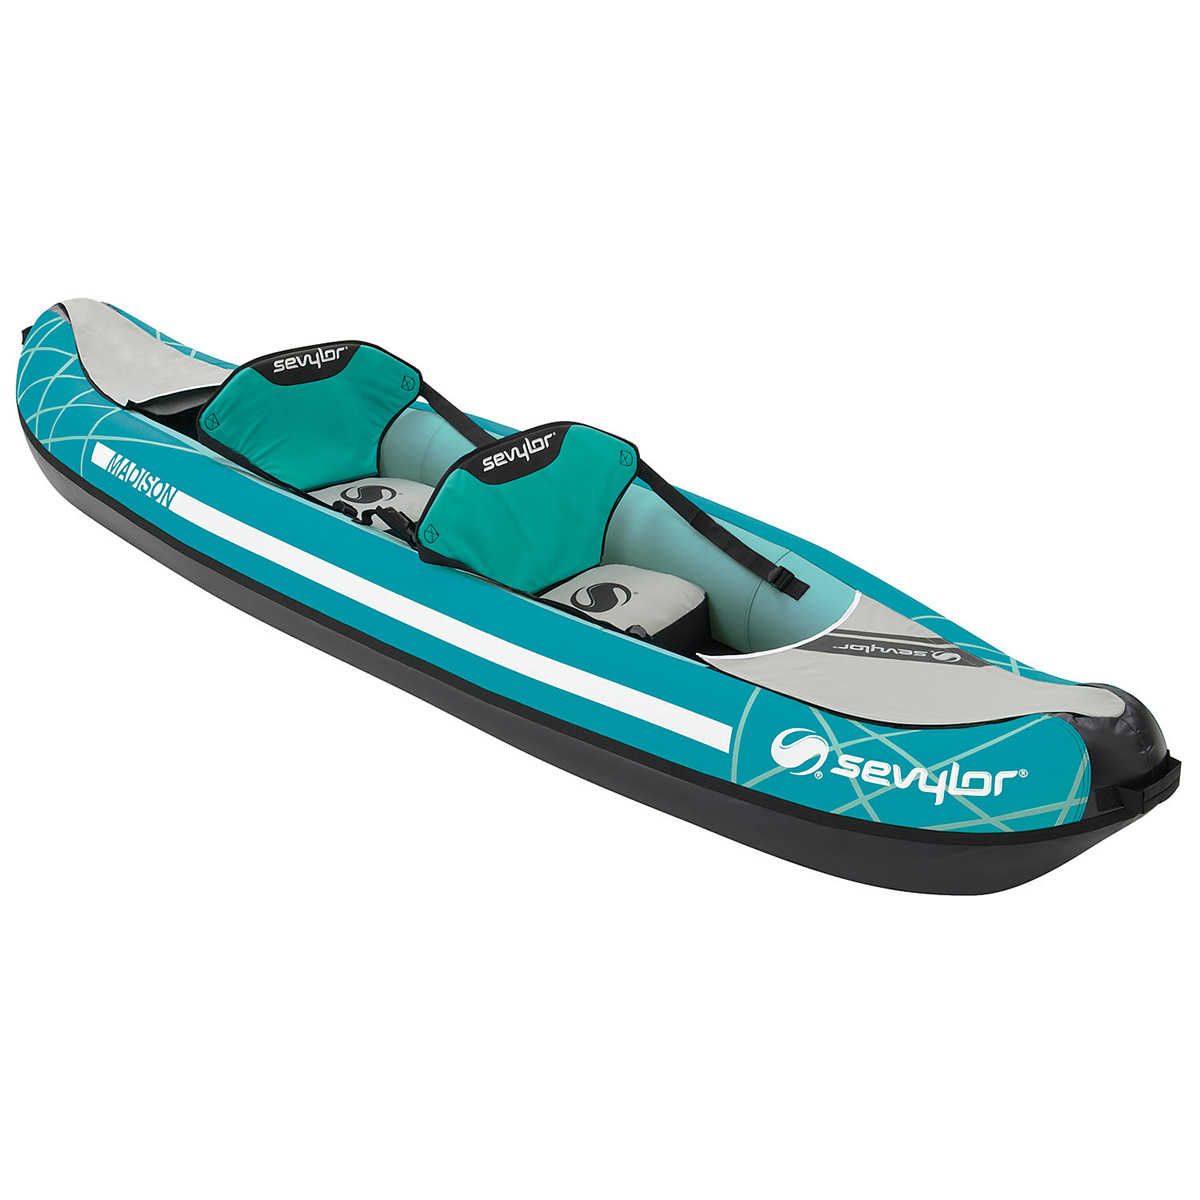 Kayak Gonflable Madison - 2 personnes - Vert